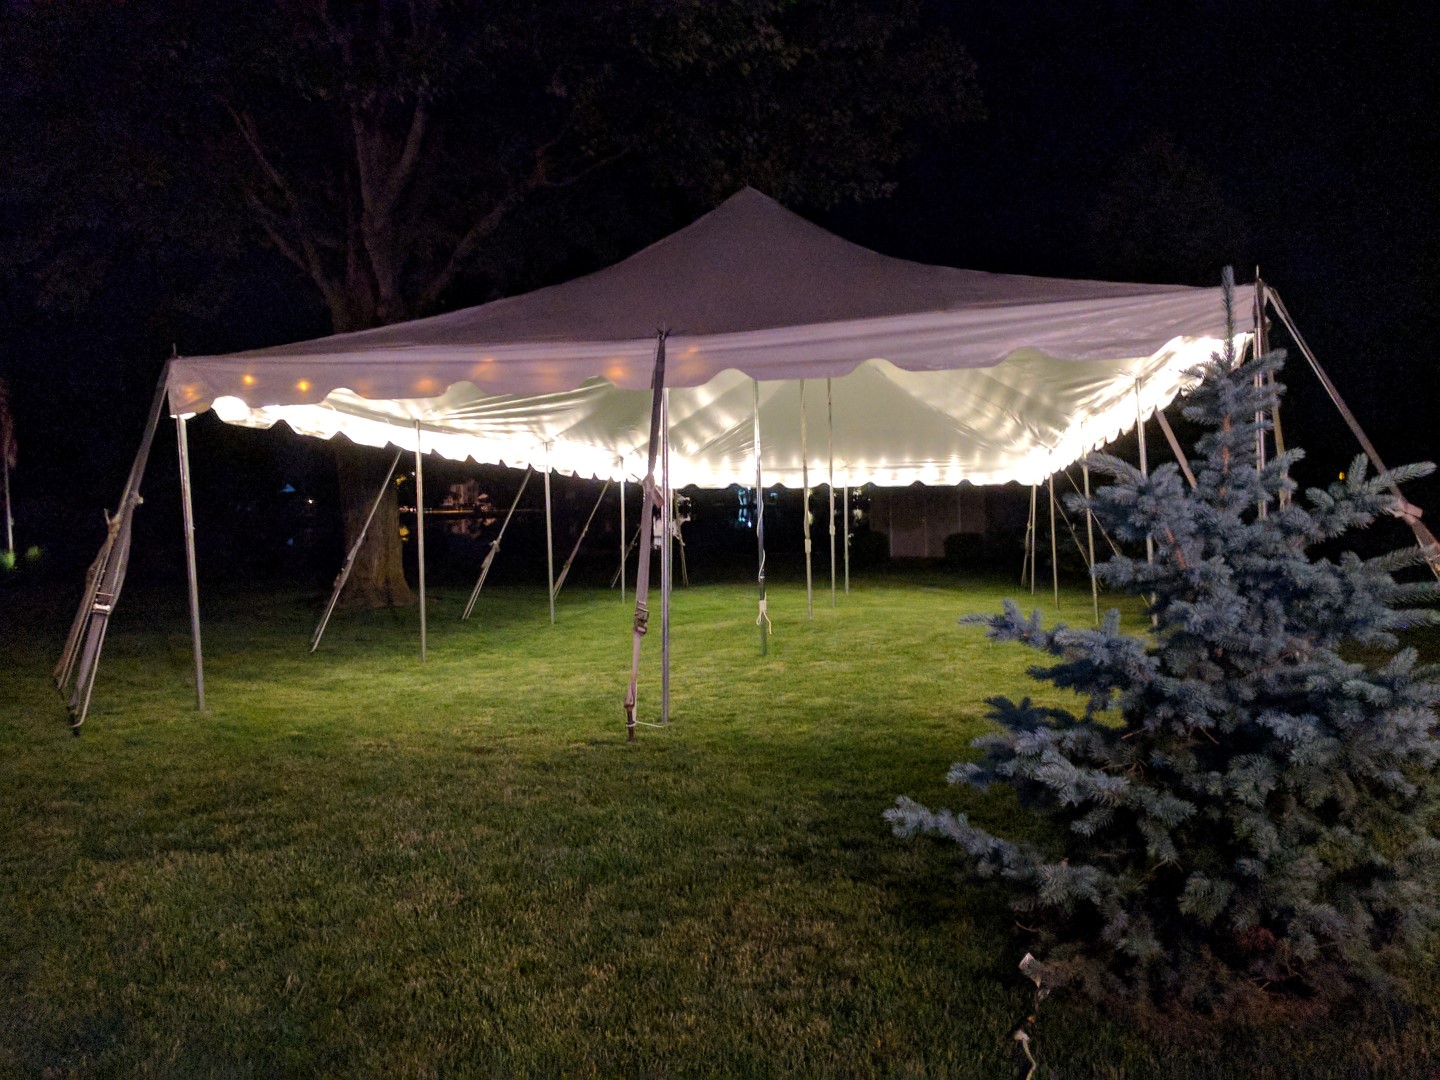 Tent lighting provides a safe environment allowing guests to have better visibility in the tent at dark